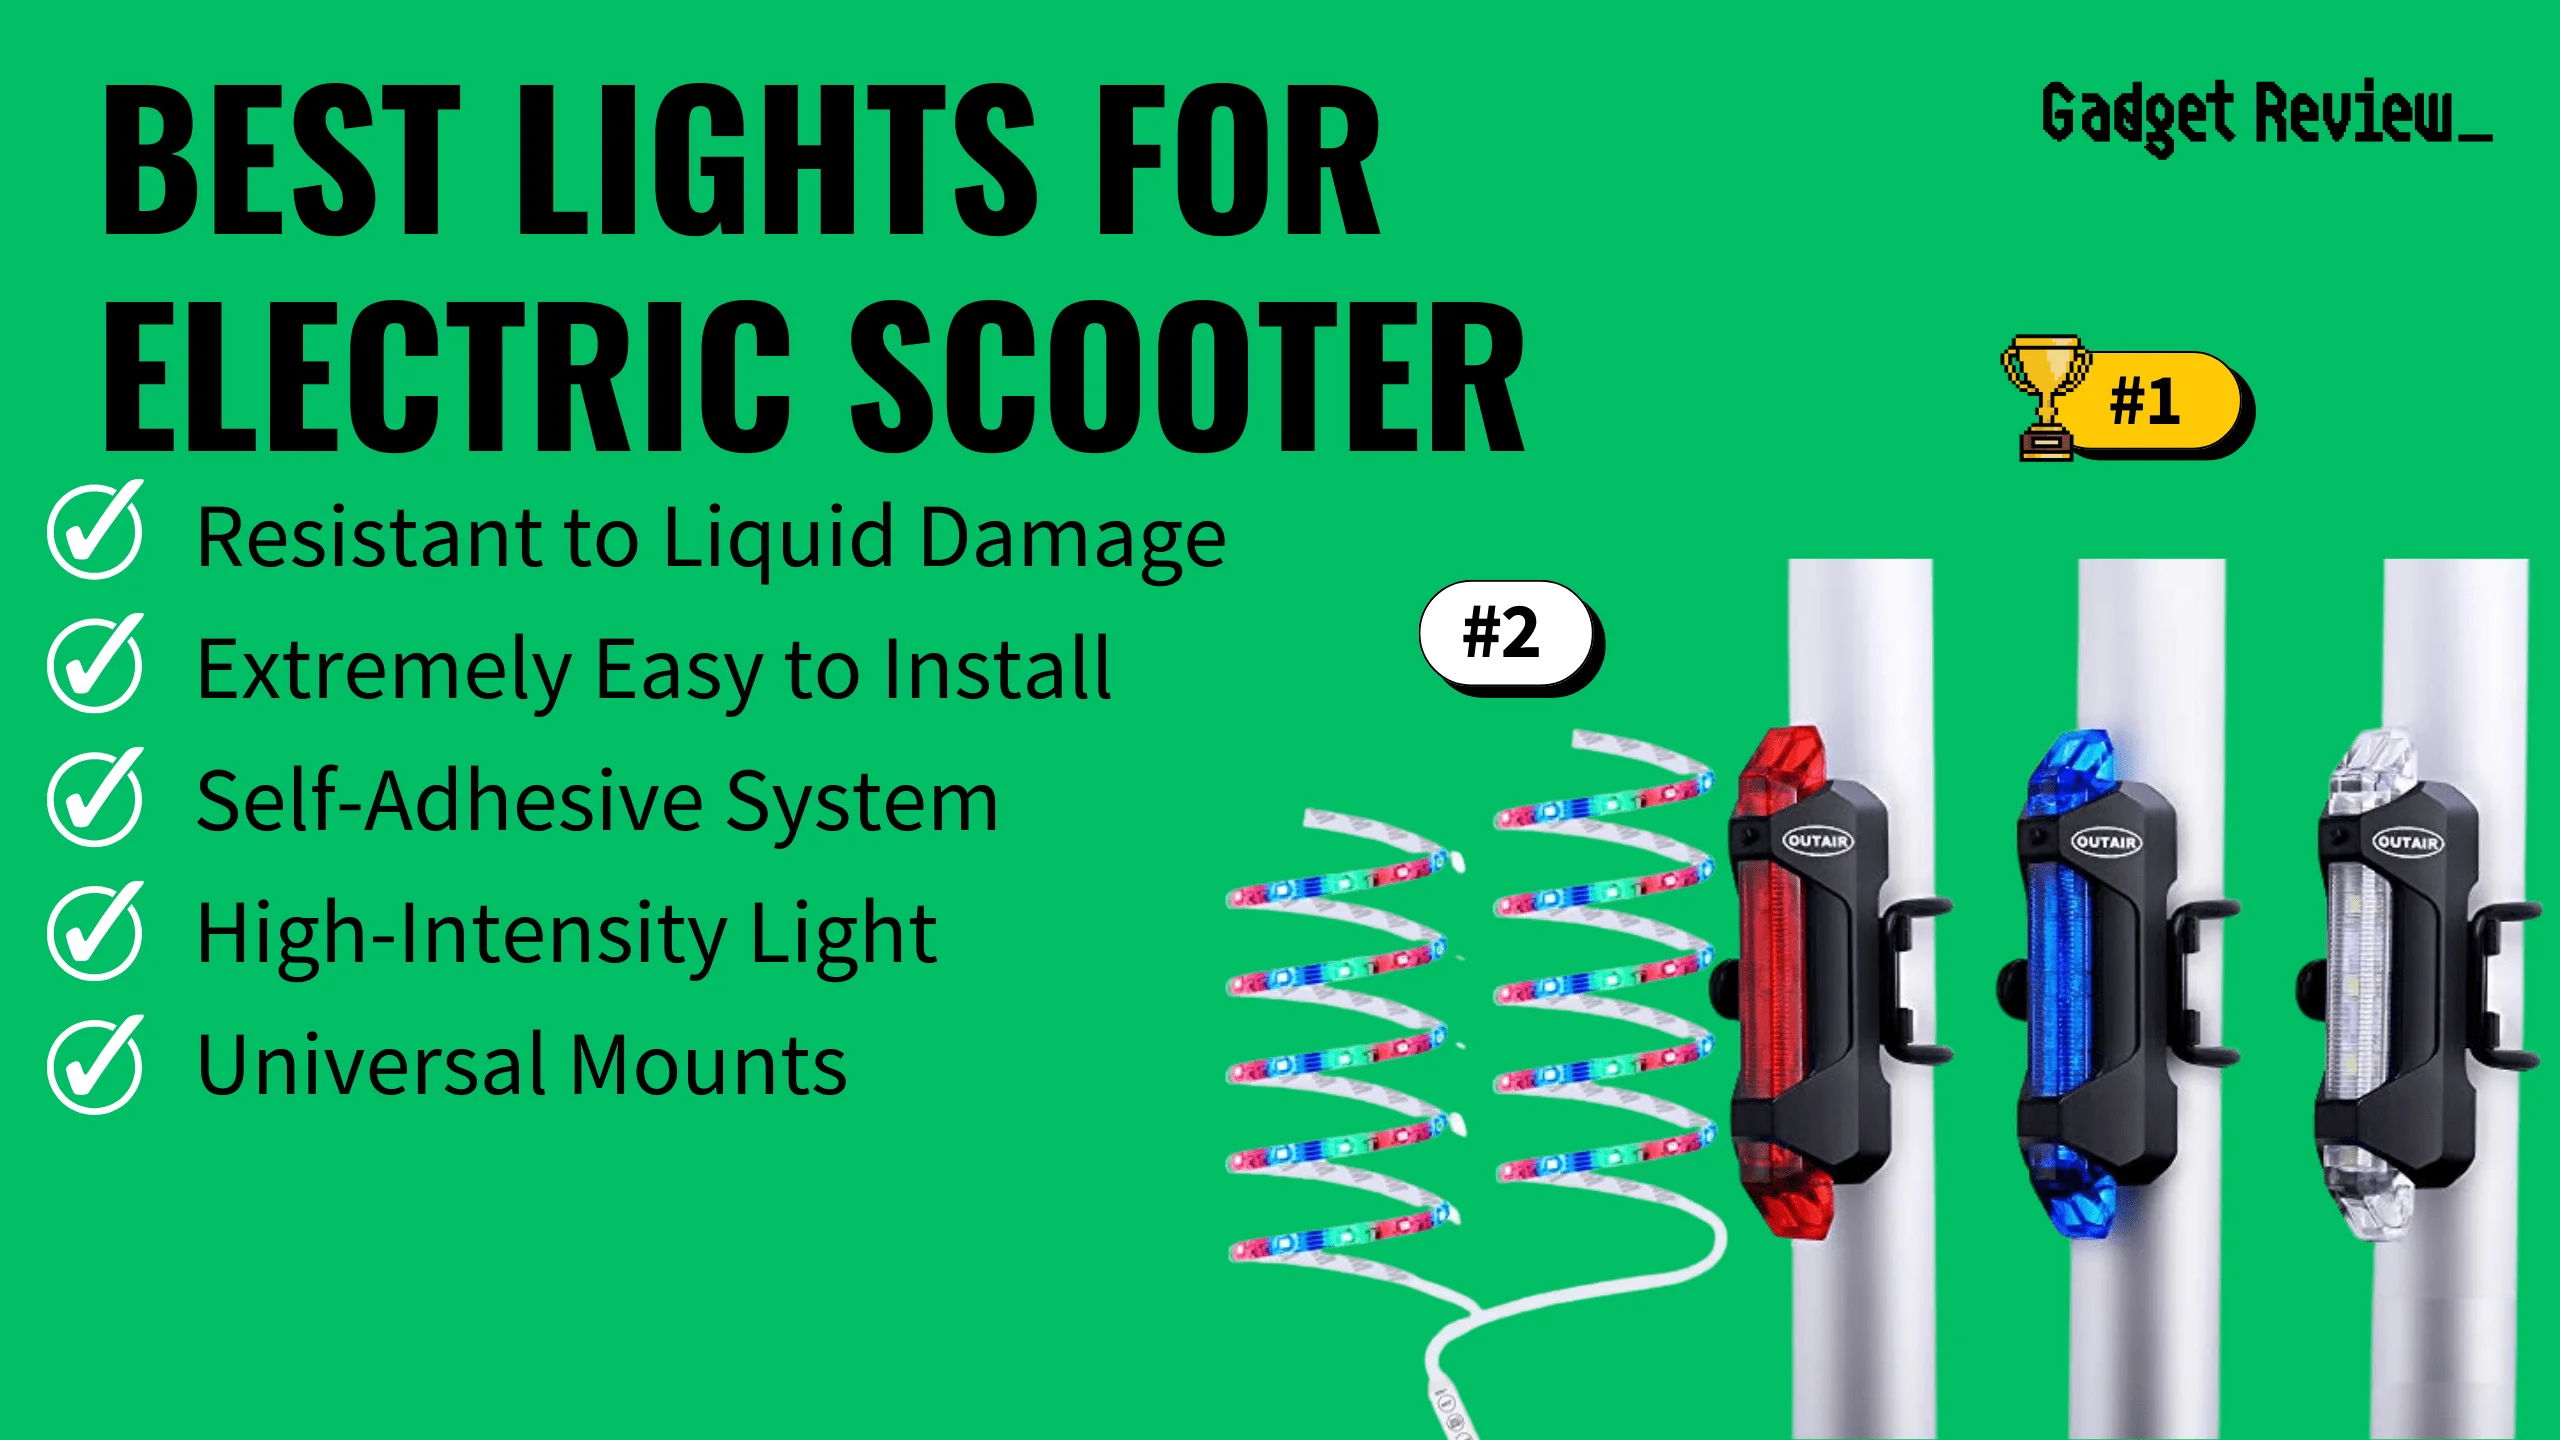 Best Lights for Electric Scooter